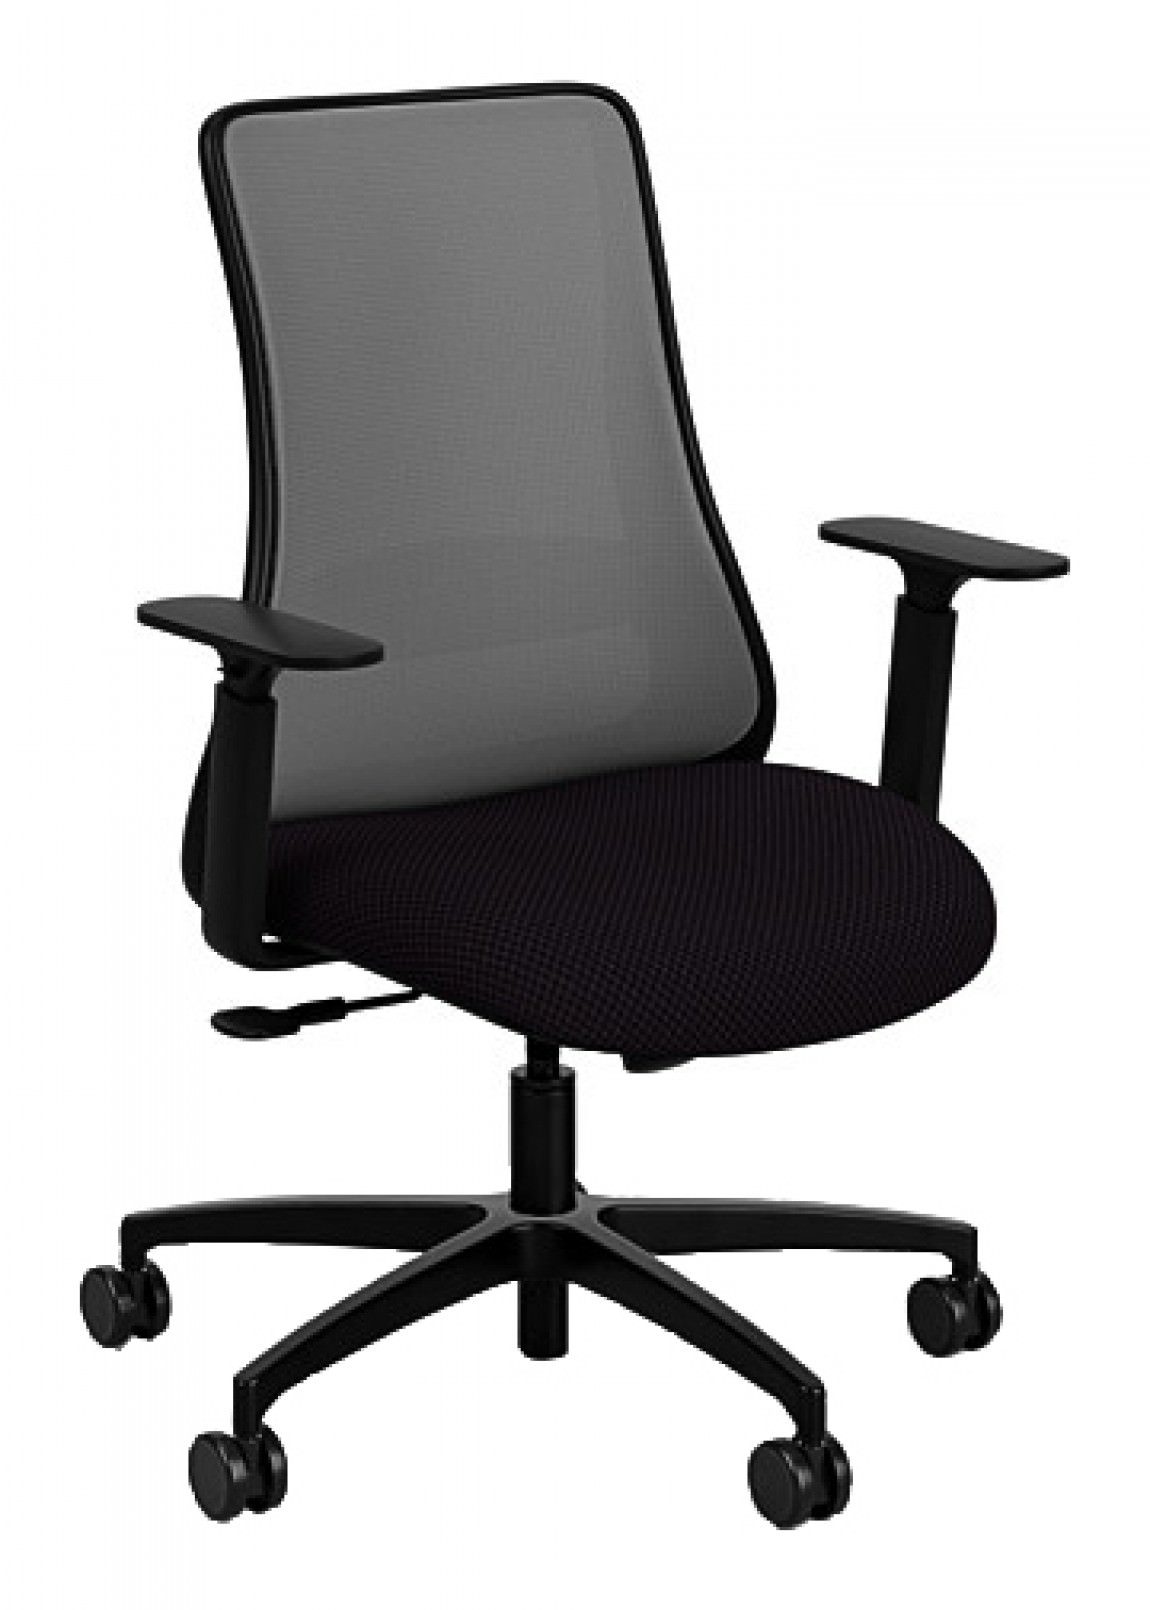 Mesh Back Chair with Lumbar Support